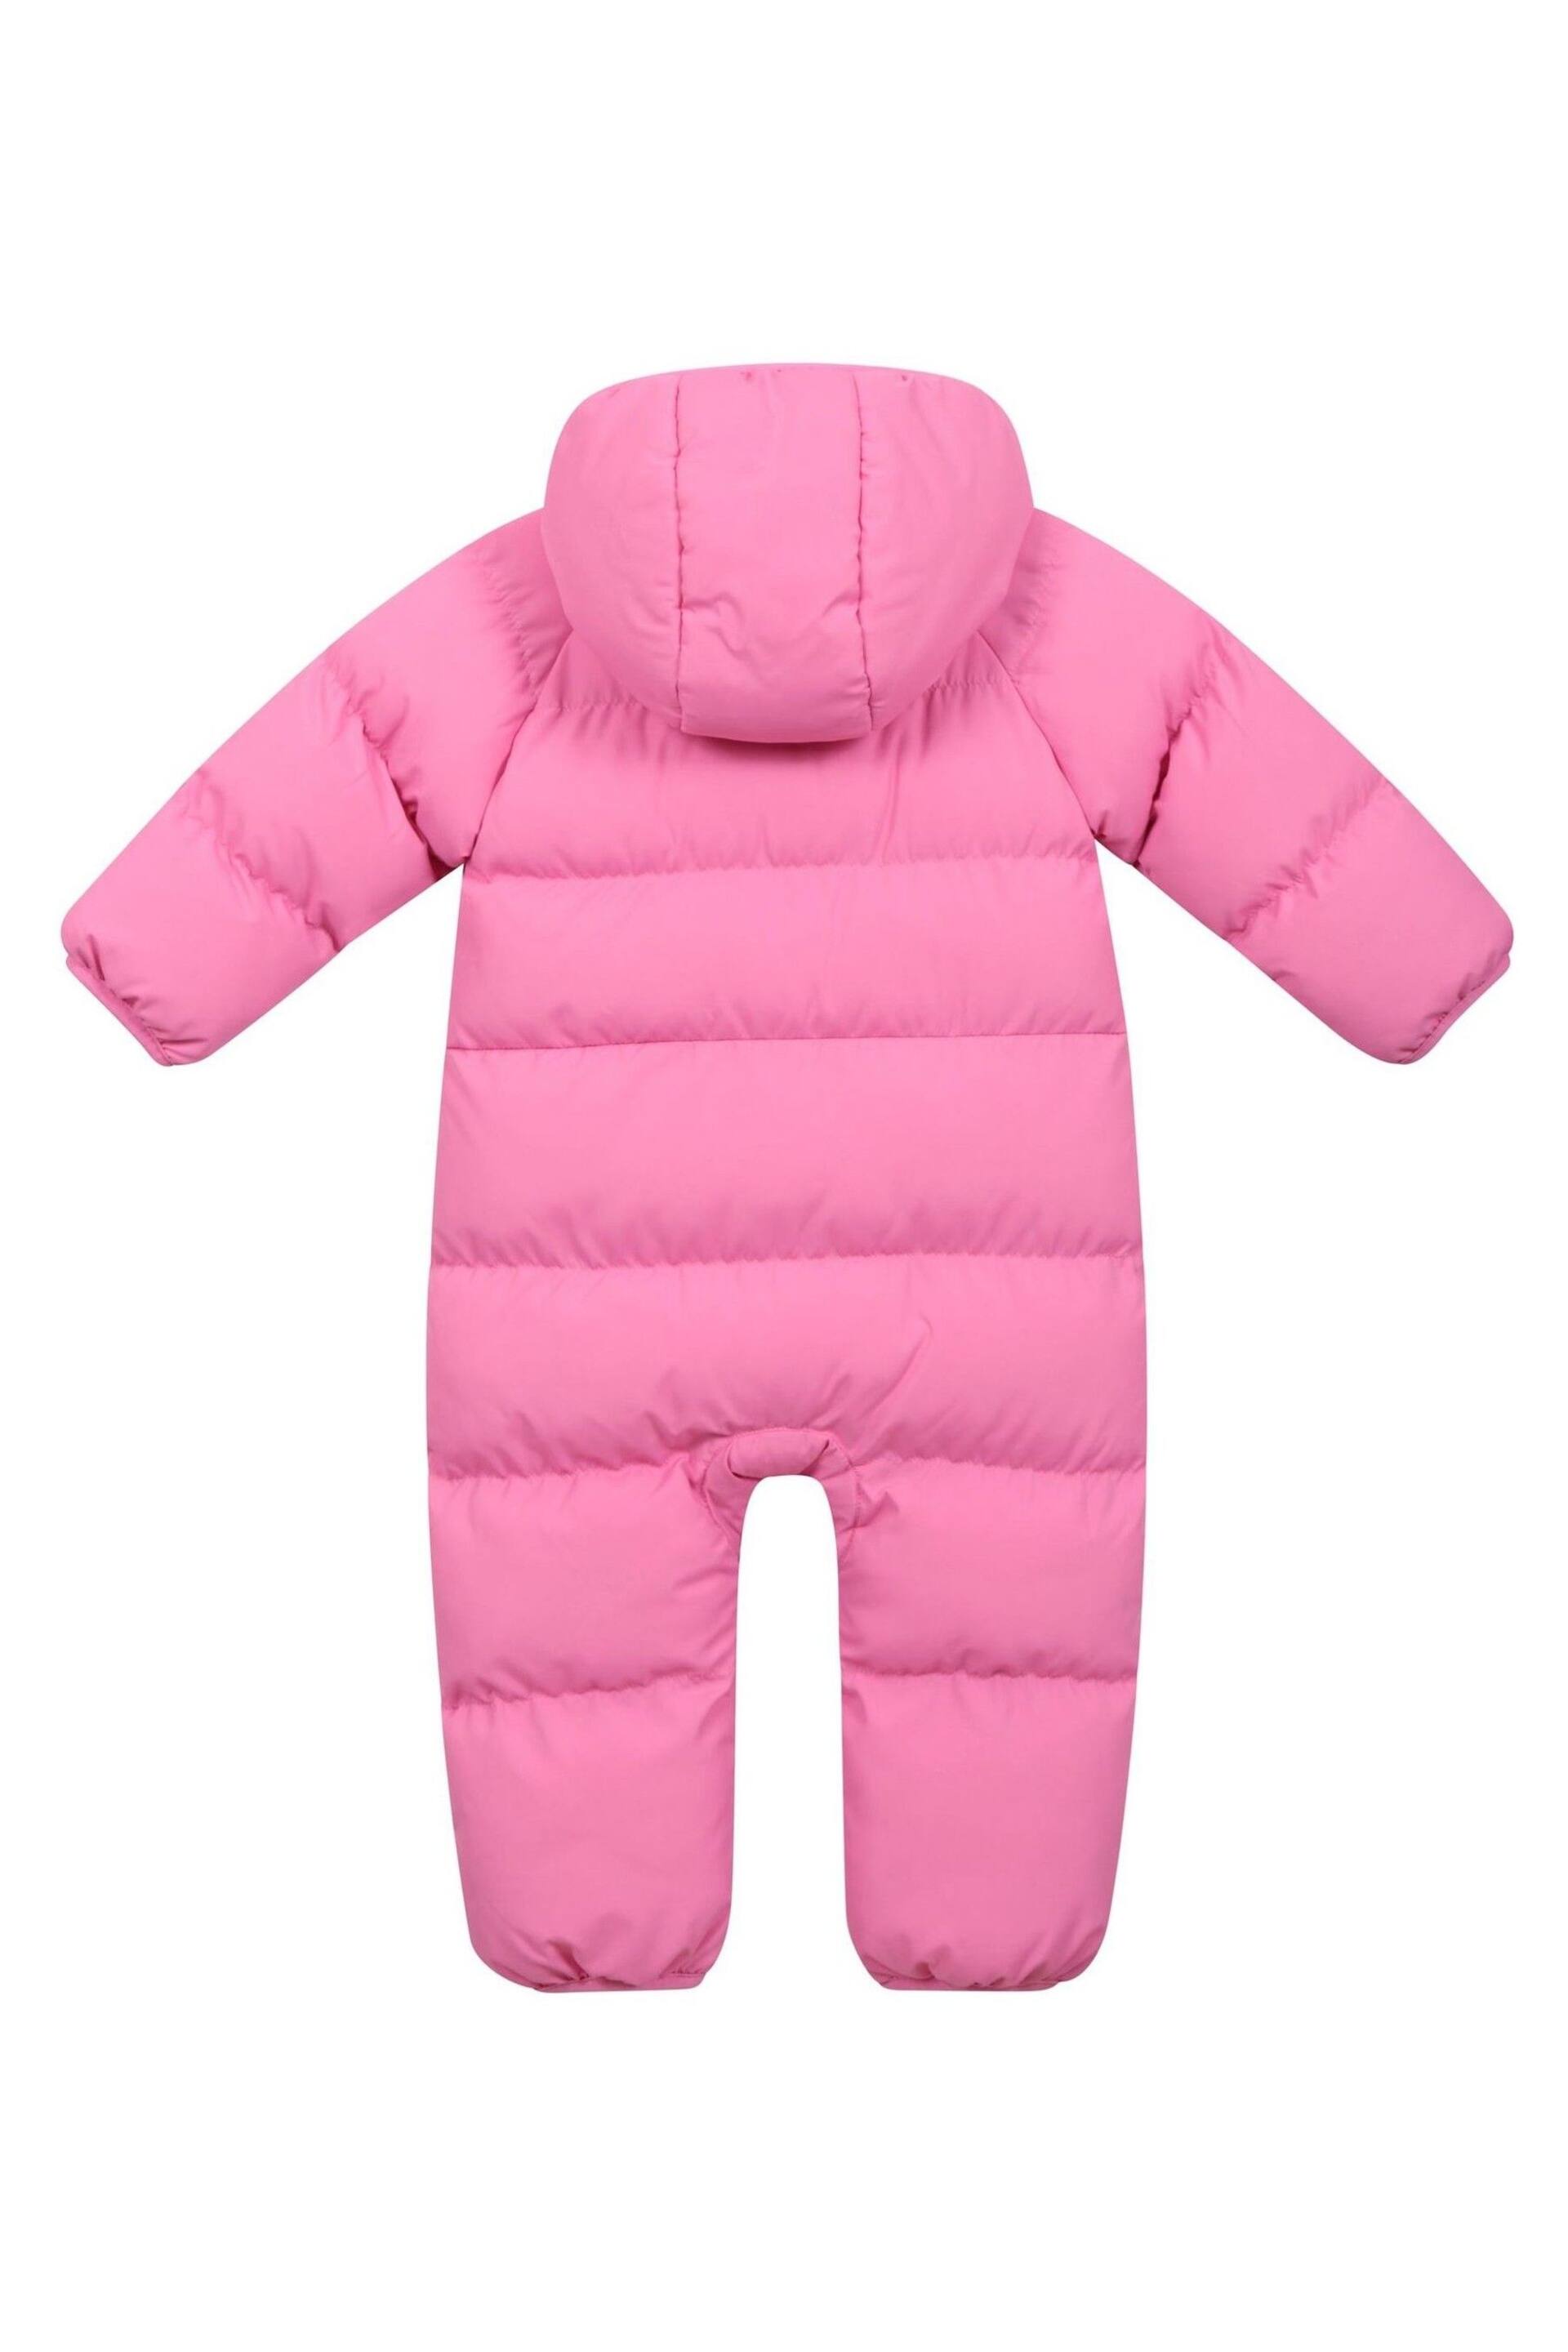 Mountain Warehouse Pink Frosty Toddler Fleece Lined Padded Suit - Image 2 of 4